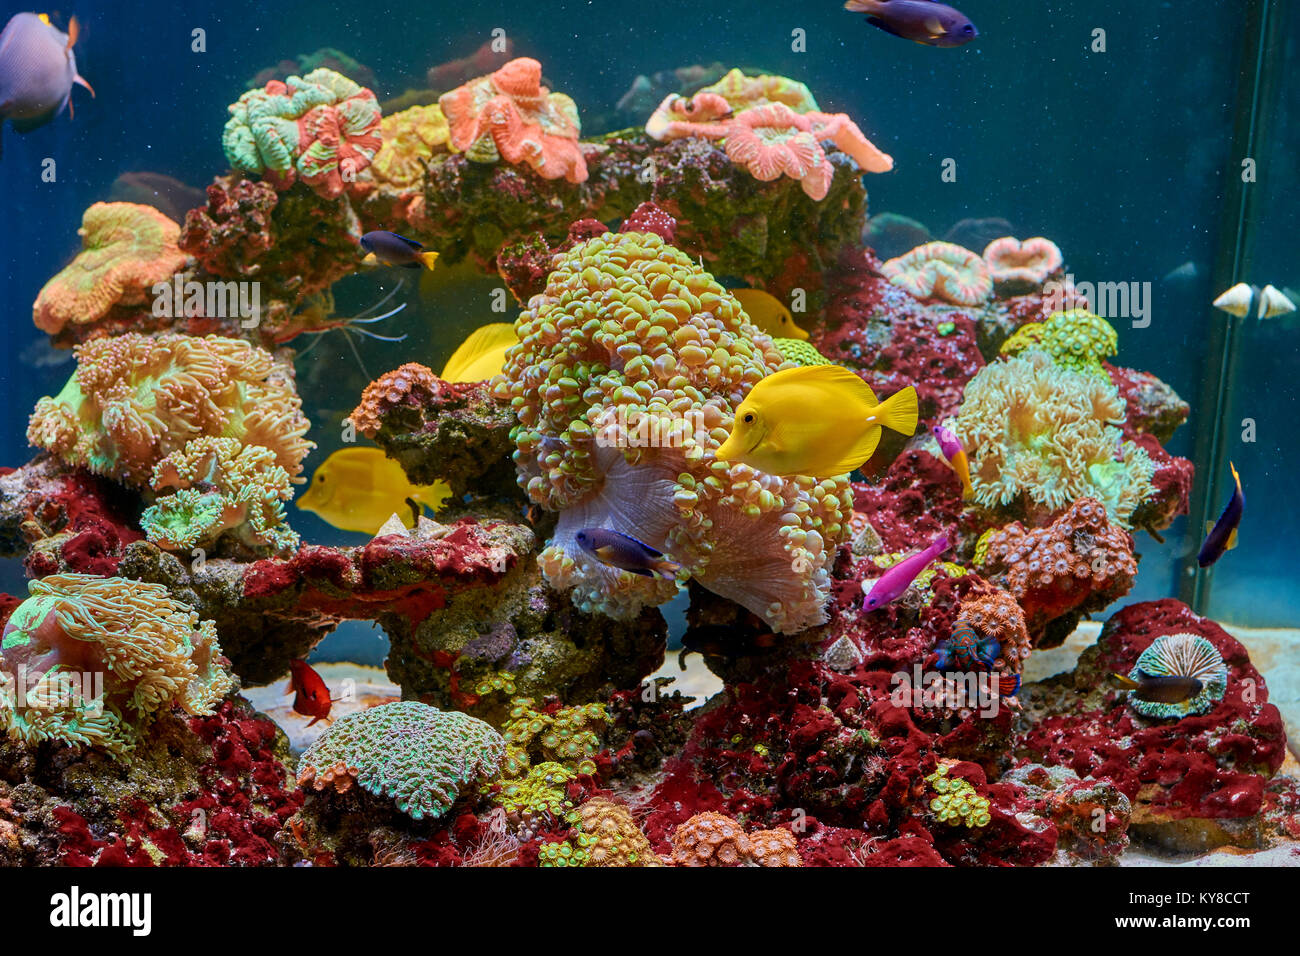 fishes and other fauna of coral reef in aquarium Stock Photo